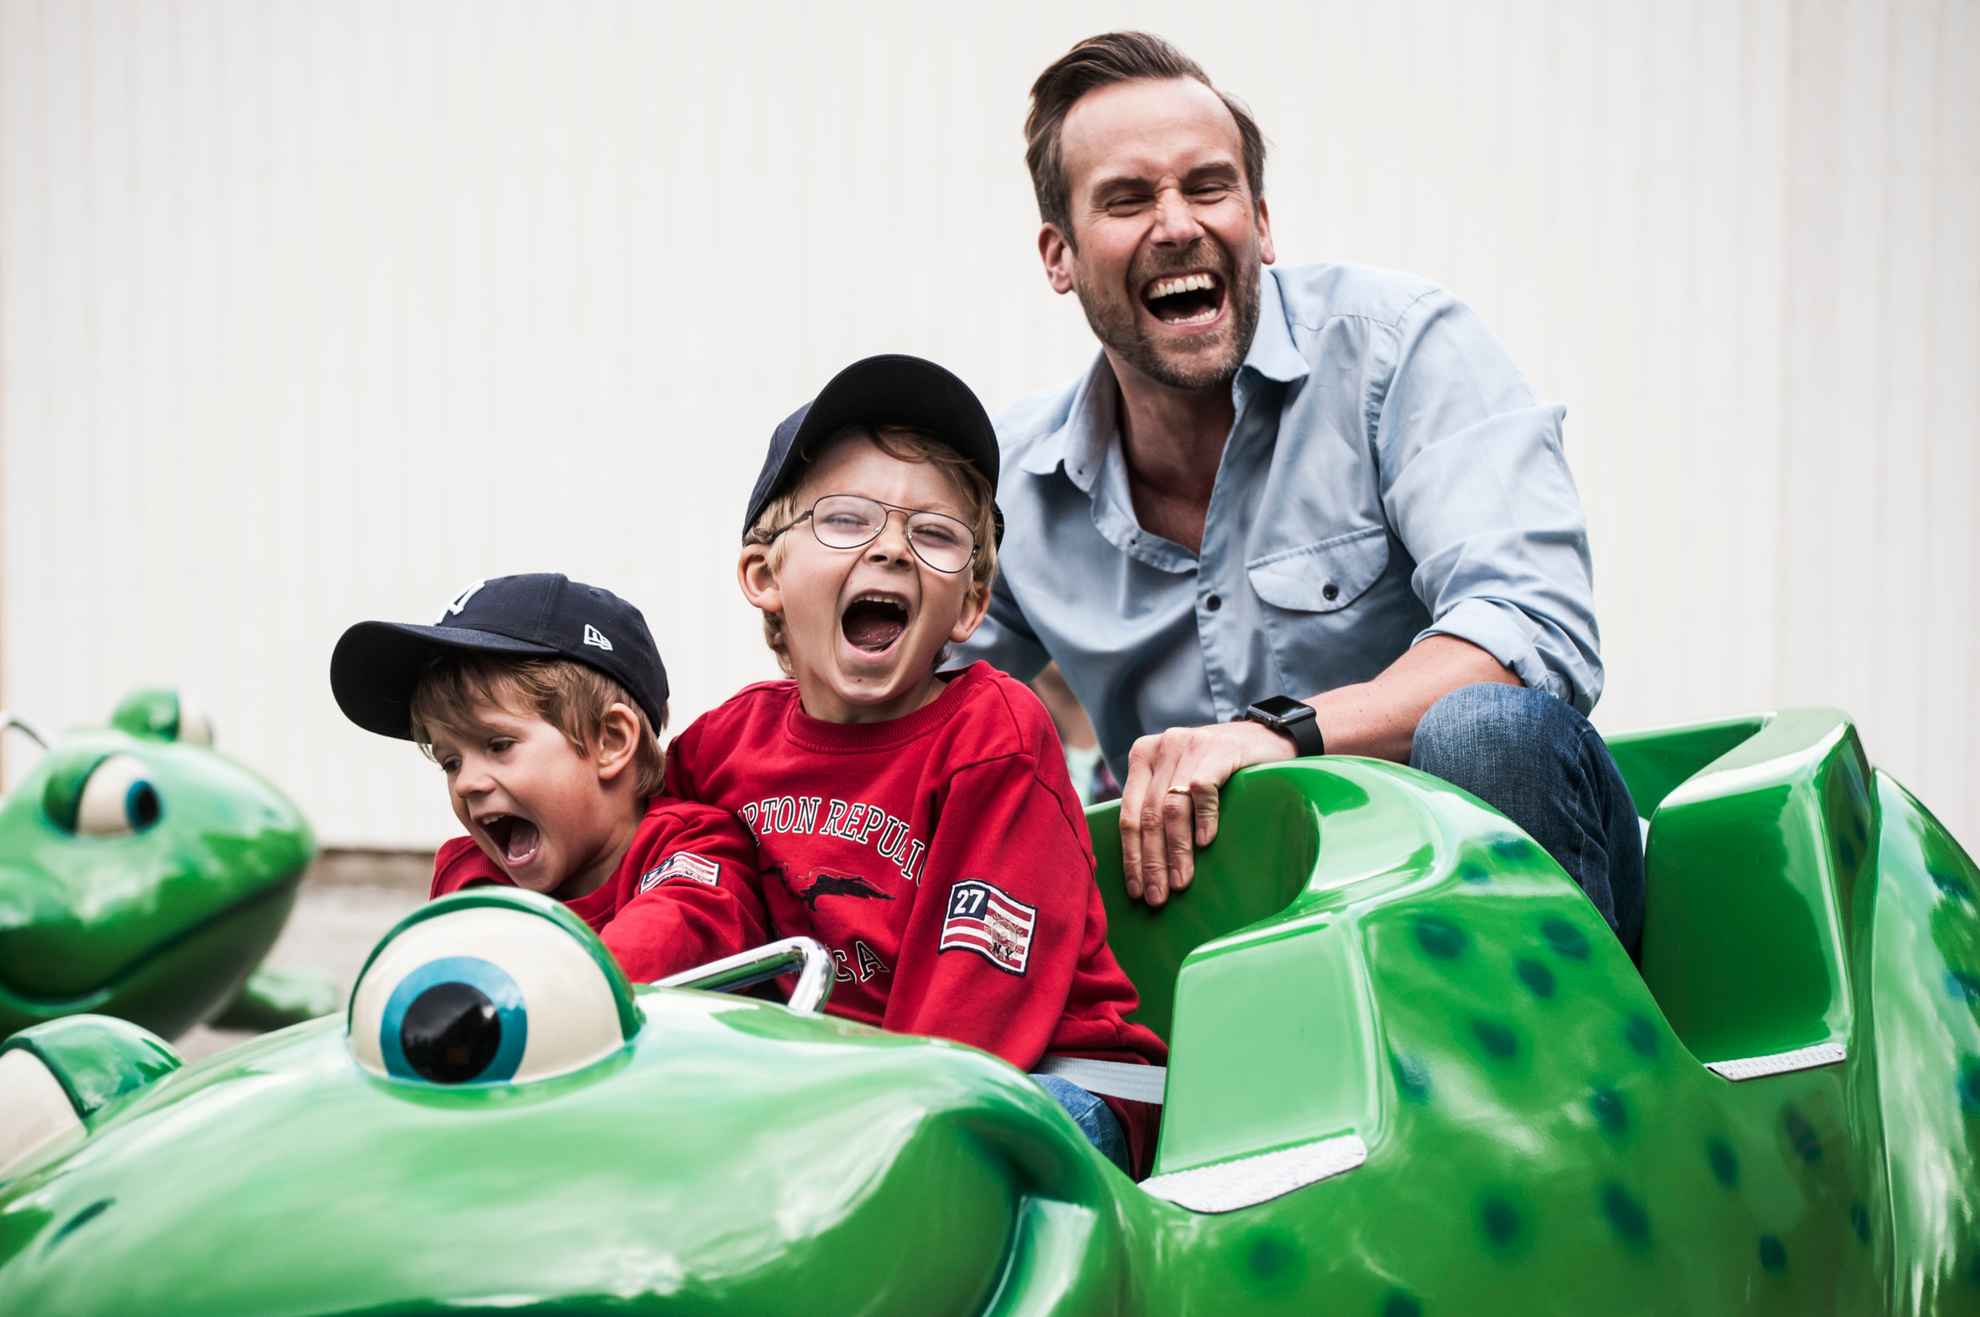 Two laughing boys in comapny with a man riding a green roller coaster at Furuvik